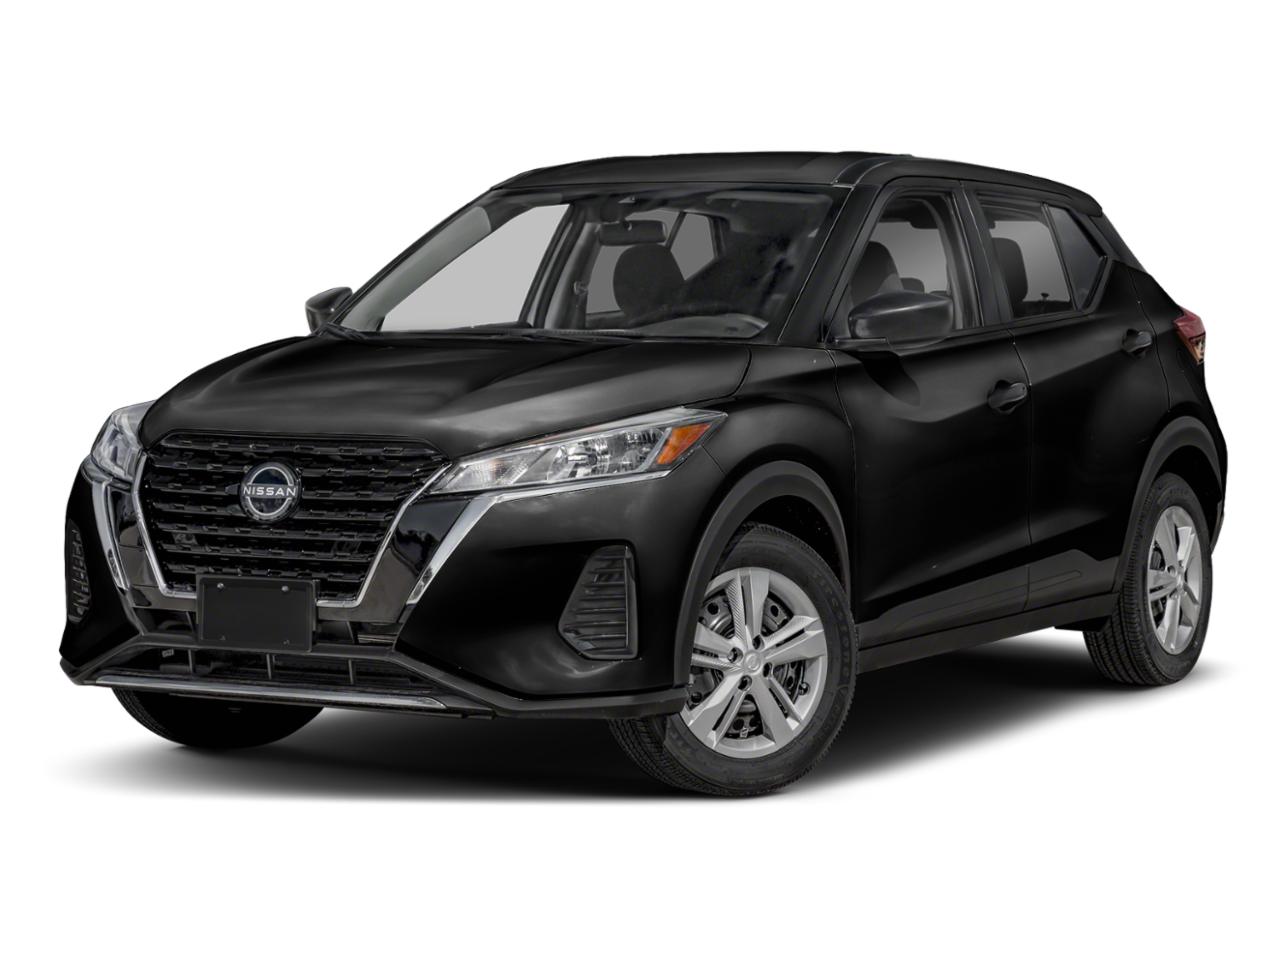 New Nissan Kicks Vehicles for Sale | Cannon Nissan of Oxford